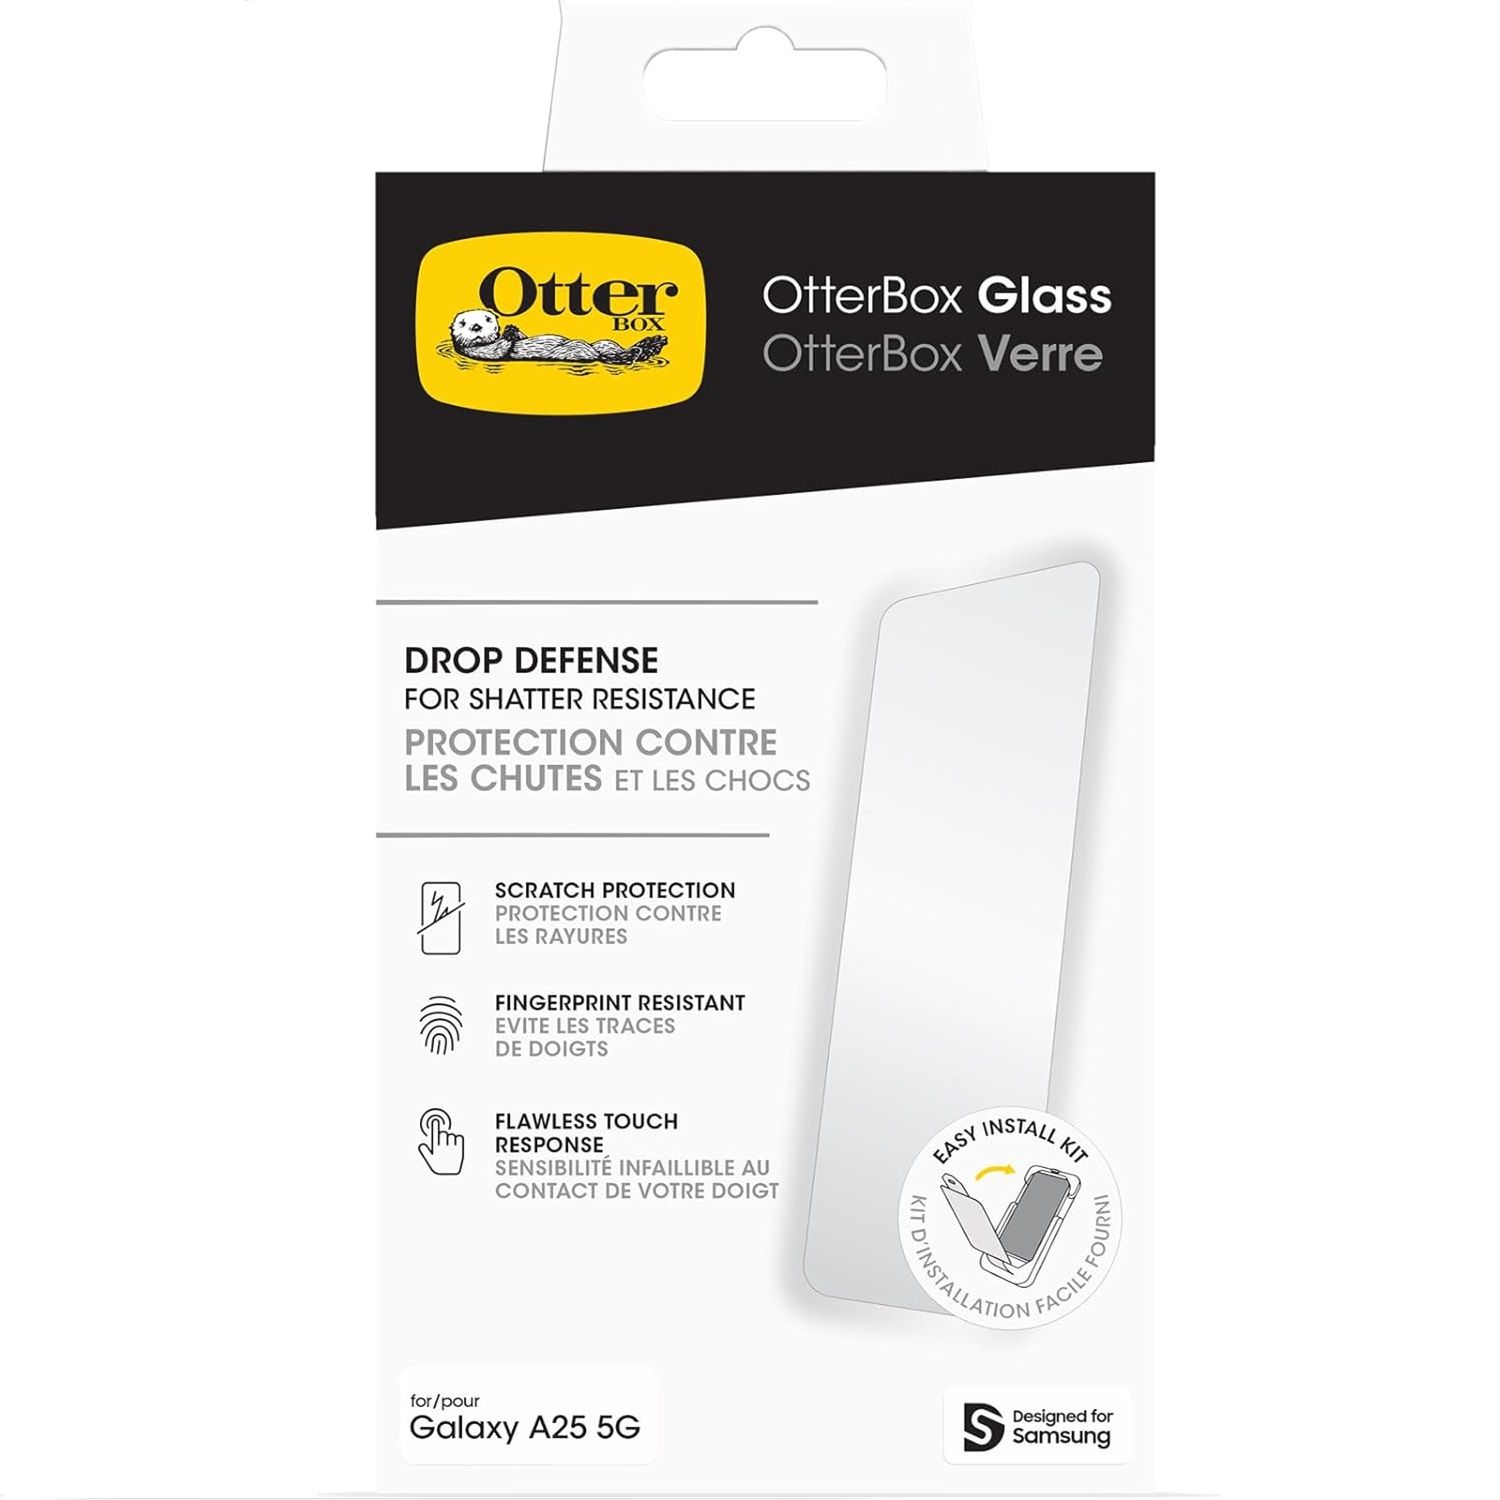 OtterBox Glass Screen Protector for Galaxy A25 5G in packaging